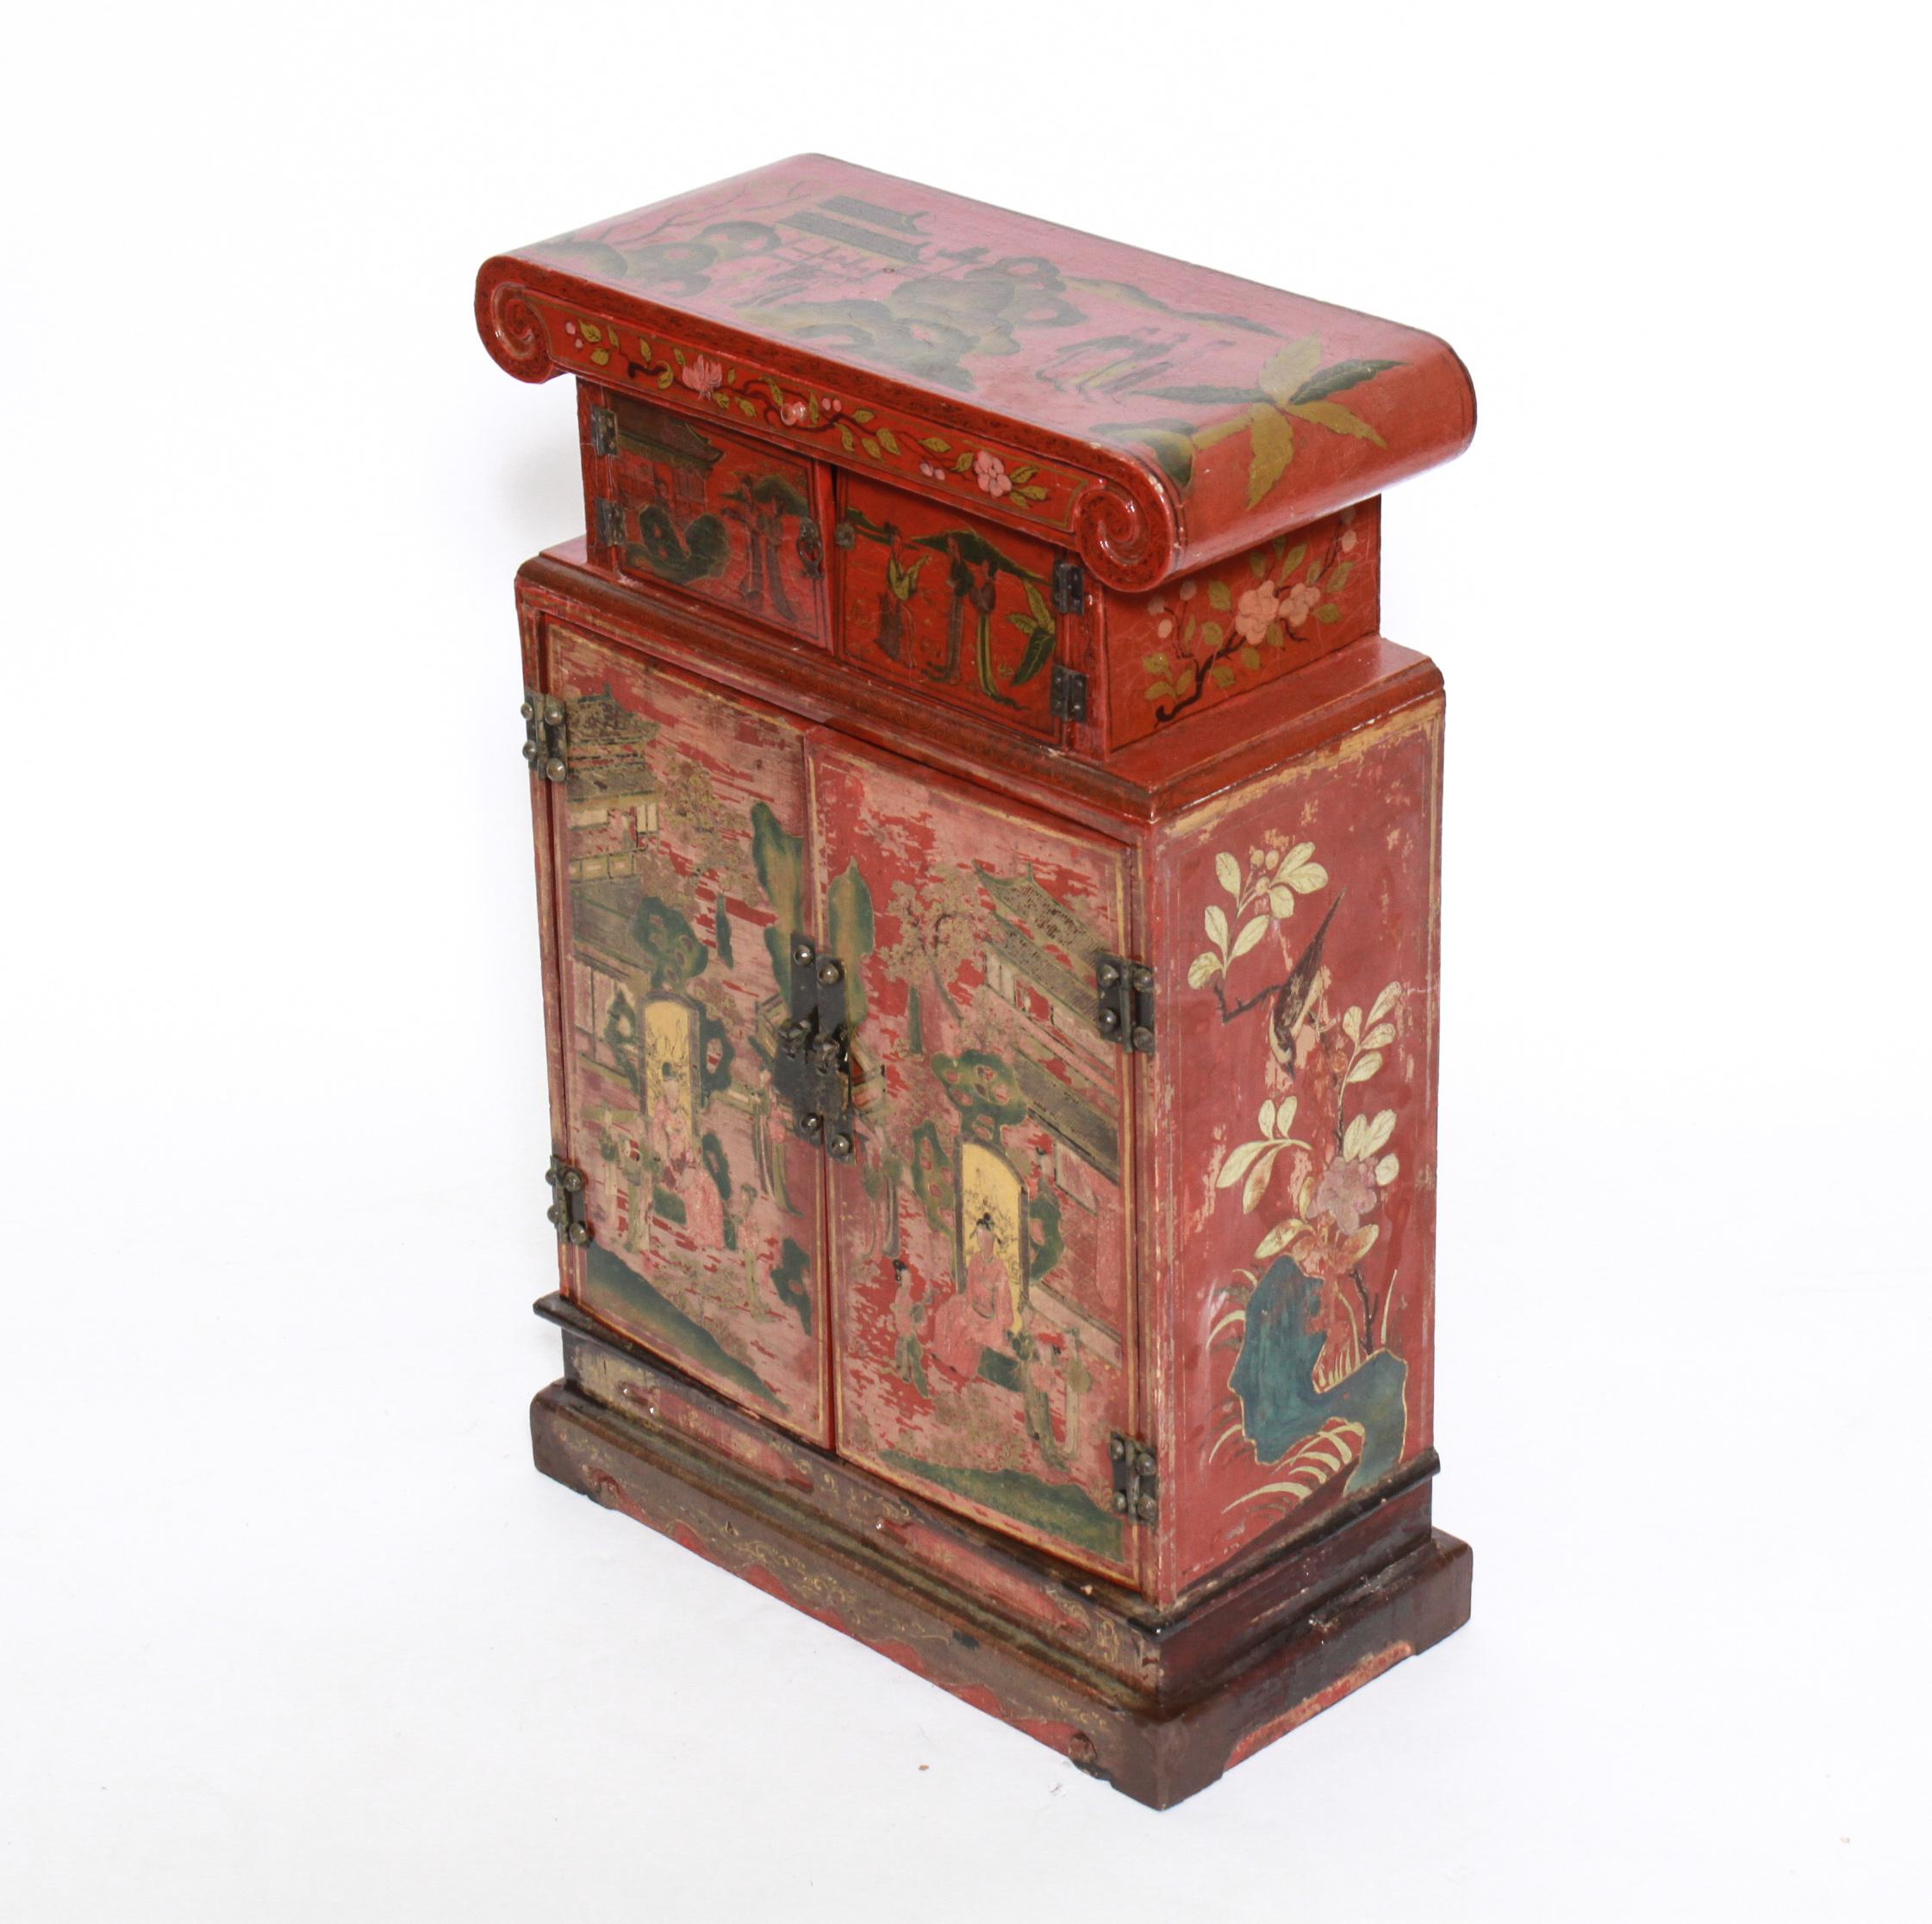 20th Century Chinoiserie Diminutive Cabinet with Painted Scenes